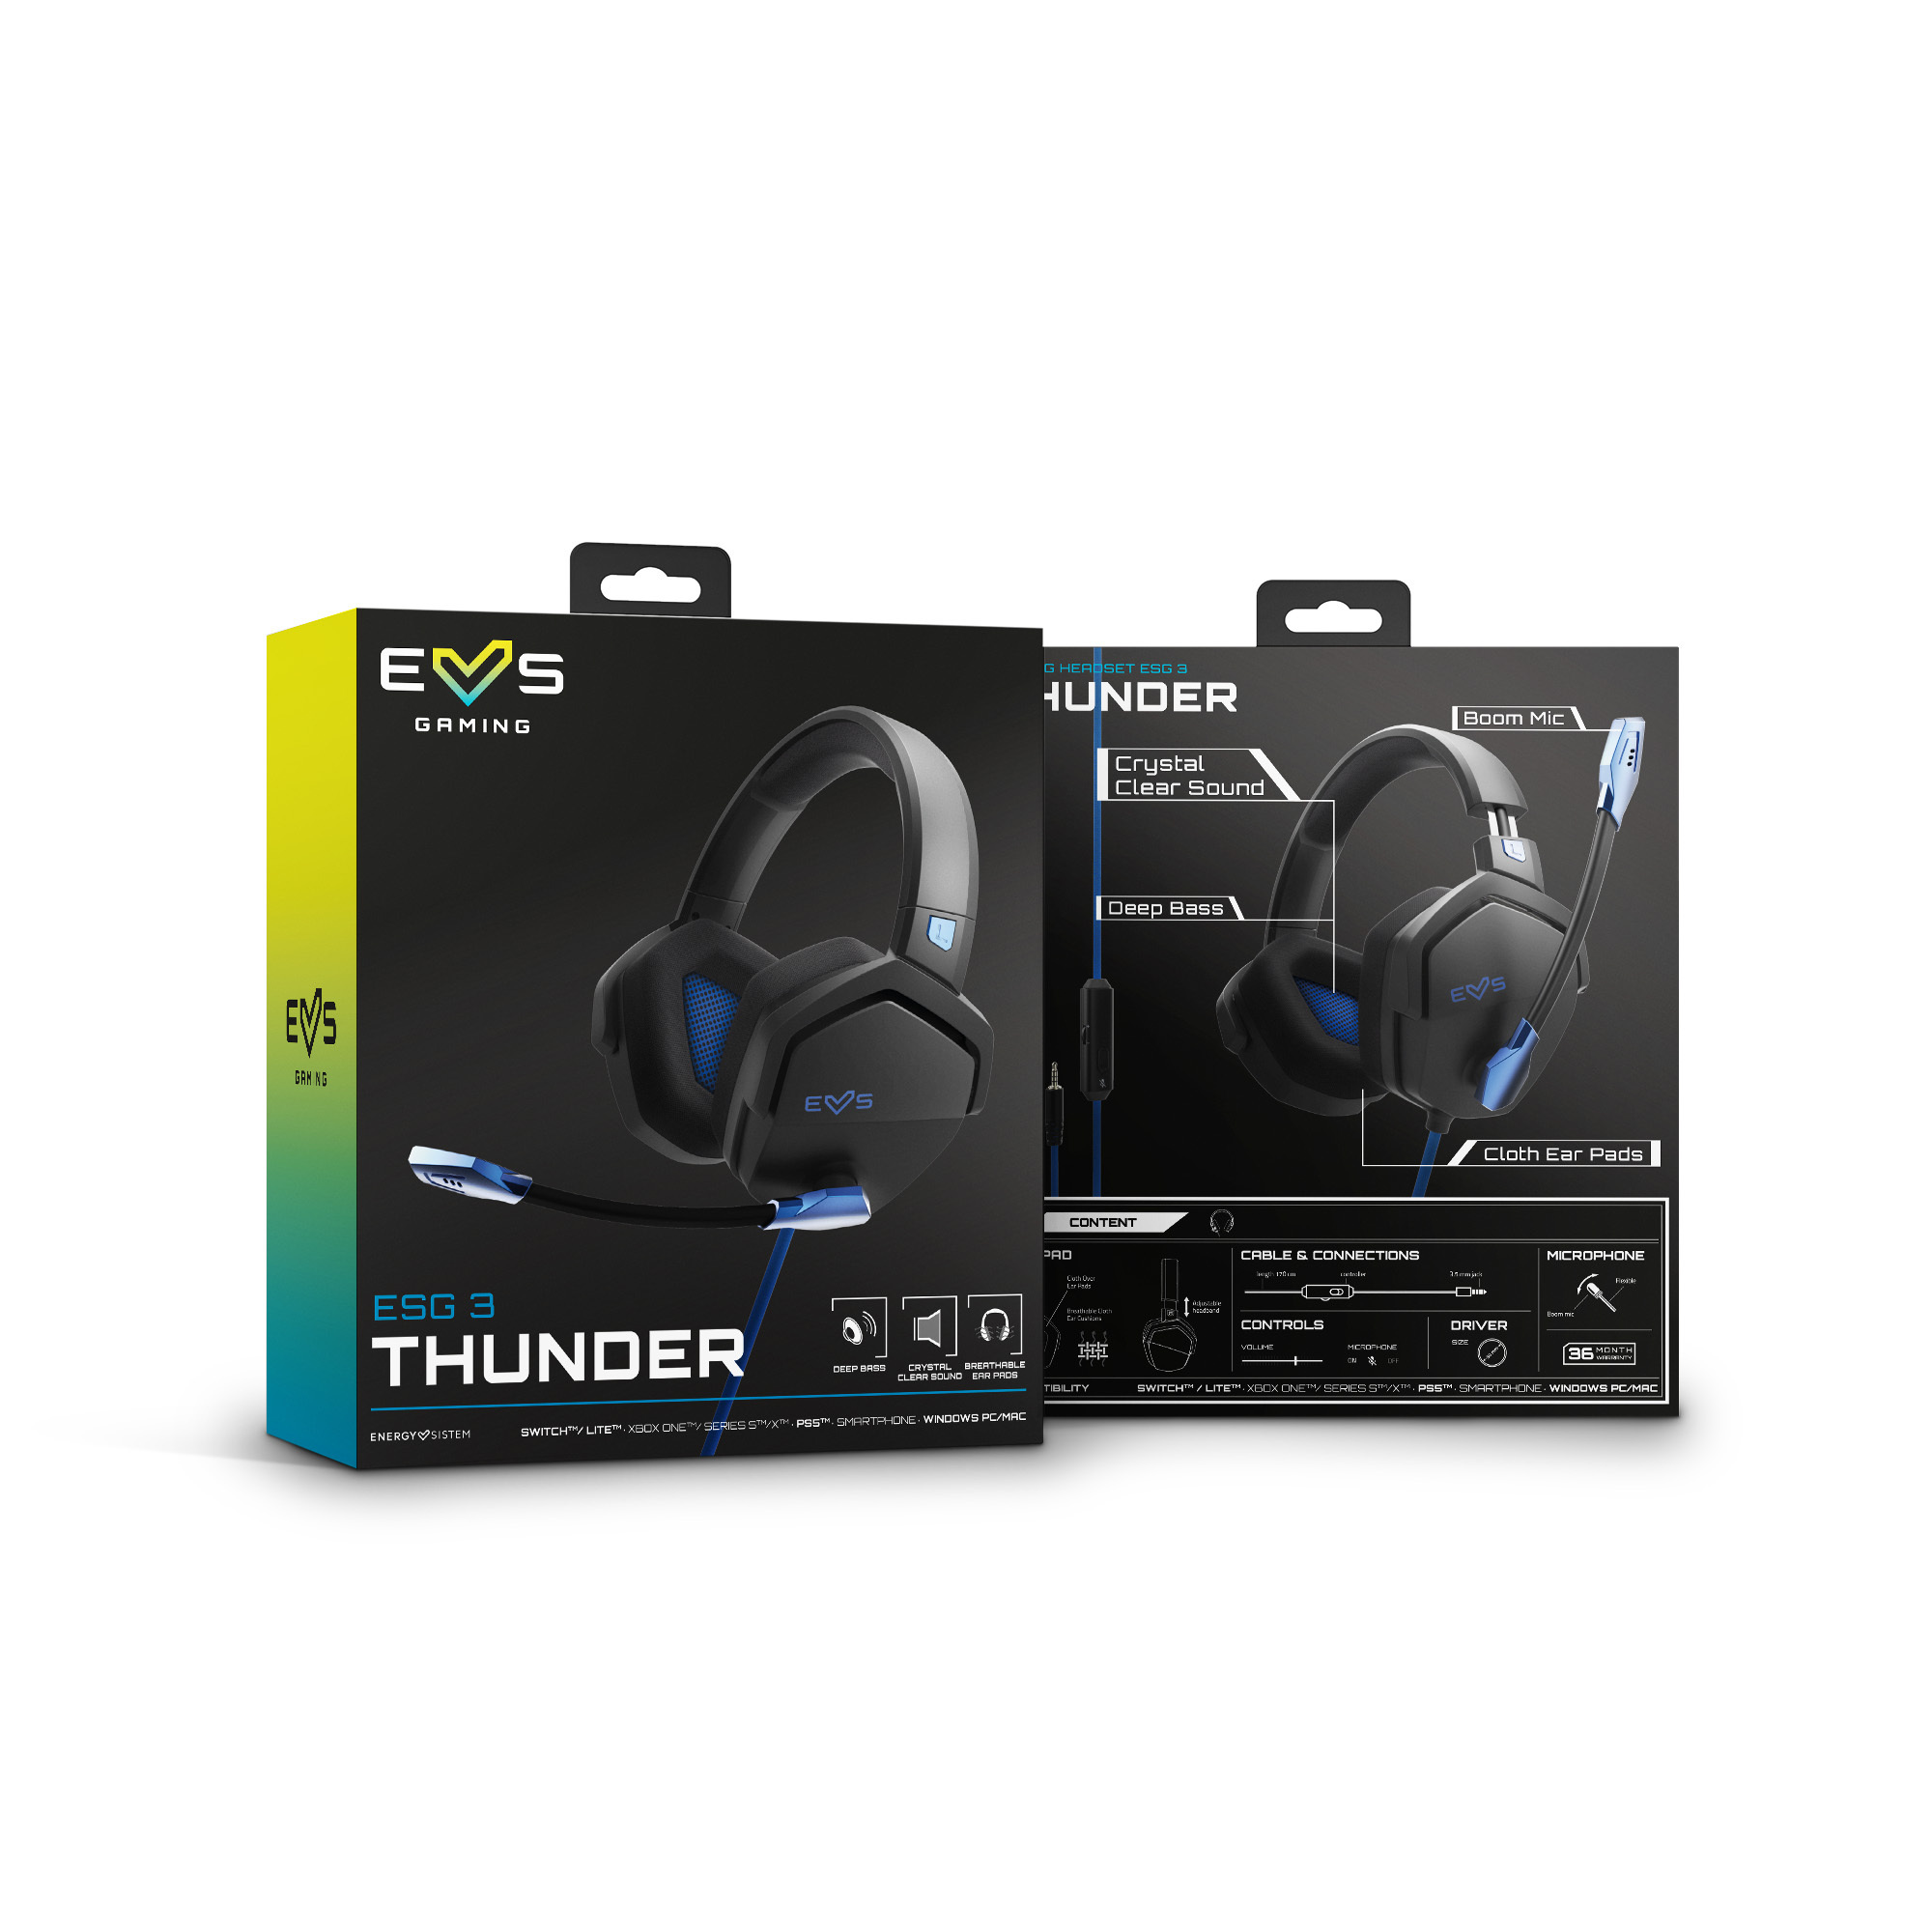 Blue gamer headset with breathable ear pads